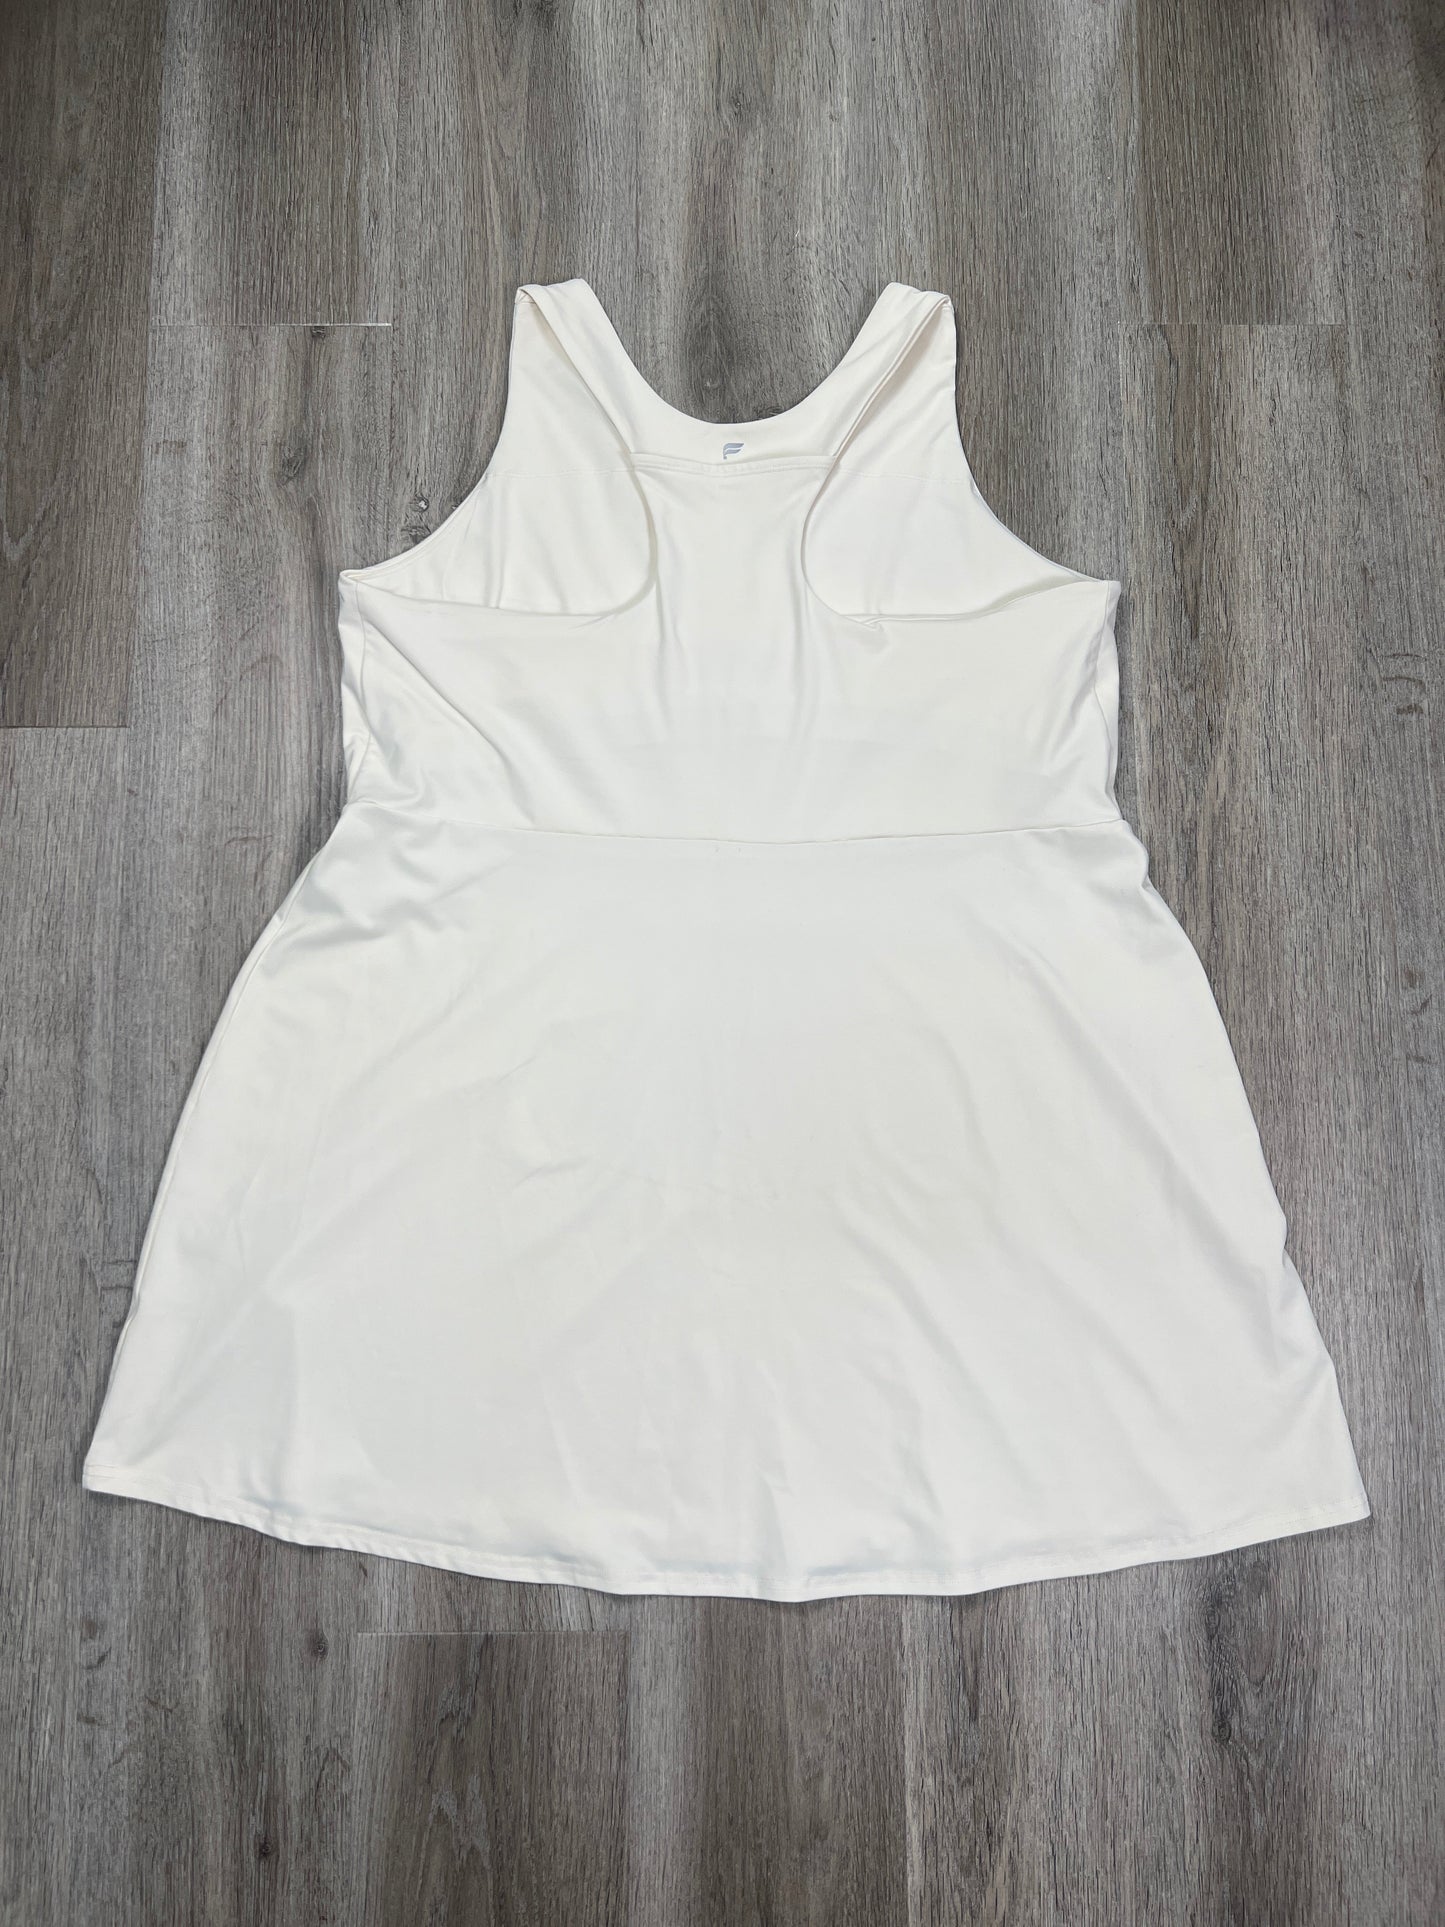 Athletic Dress By Fabletics  Size: Xxl